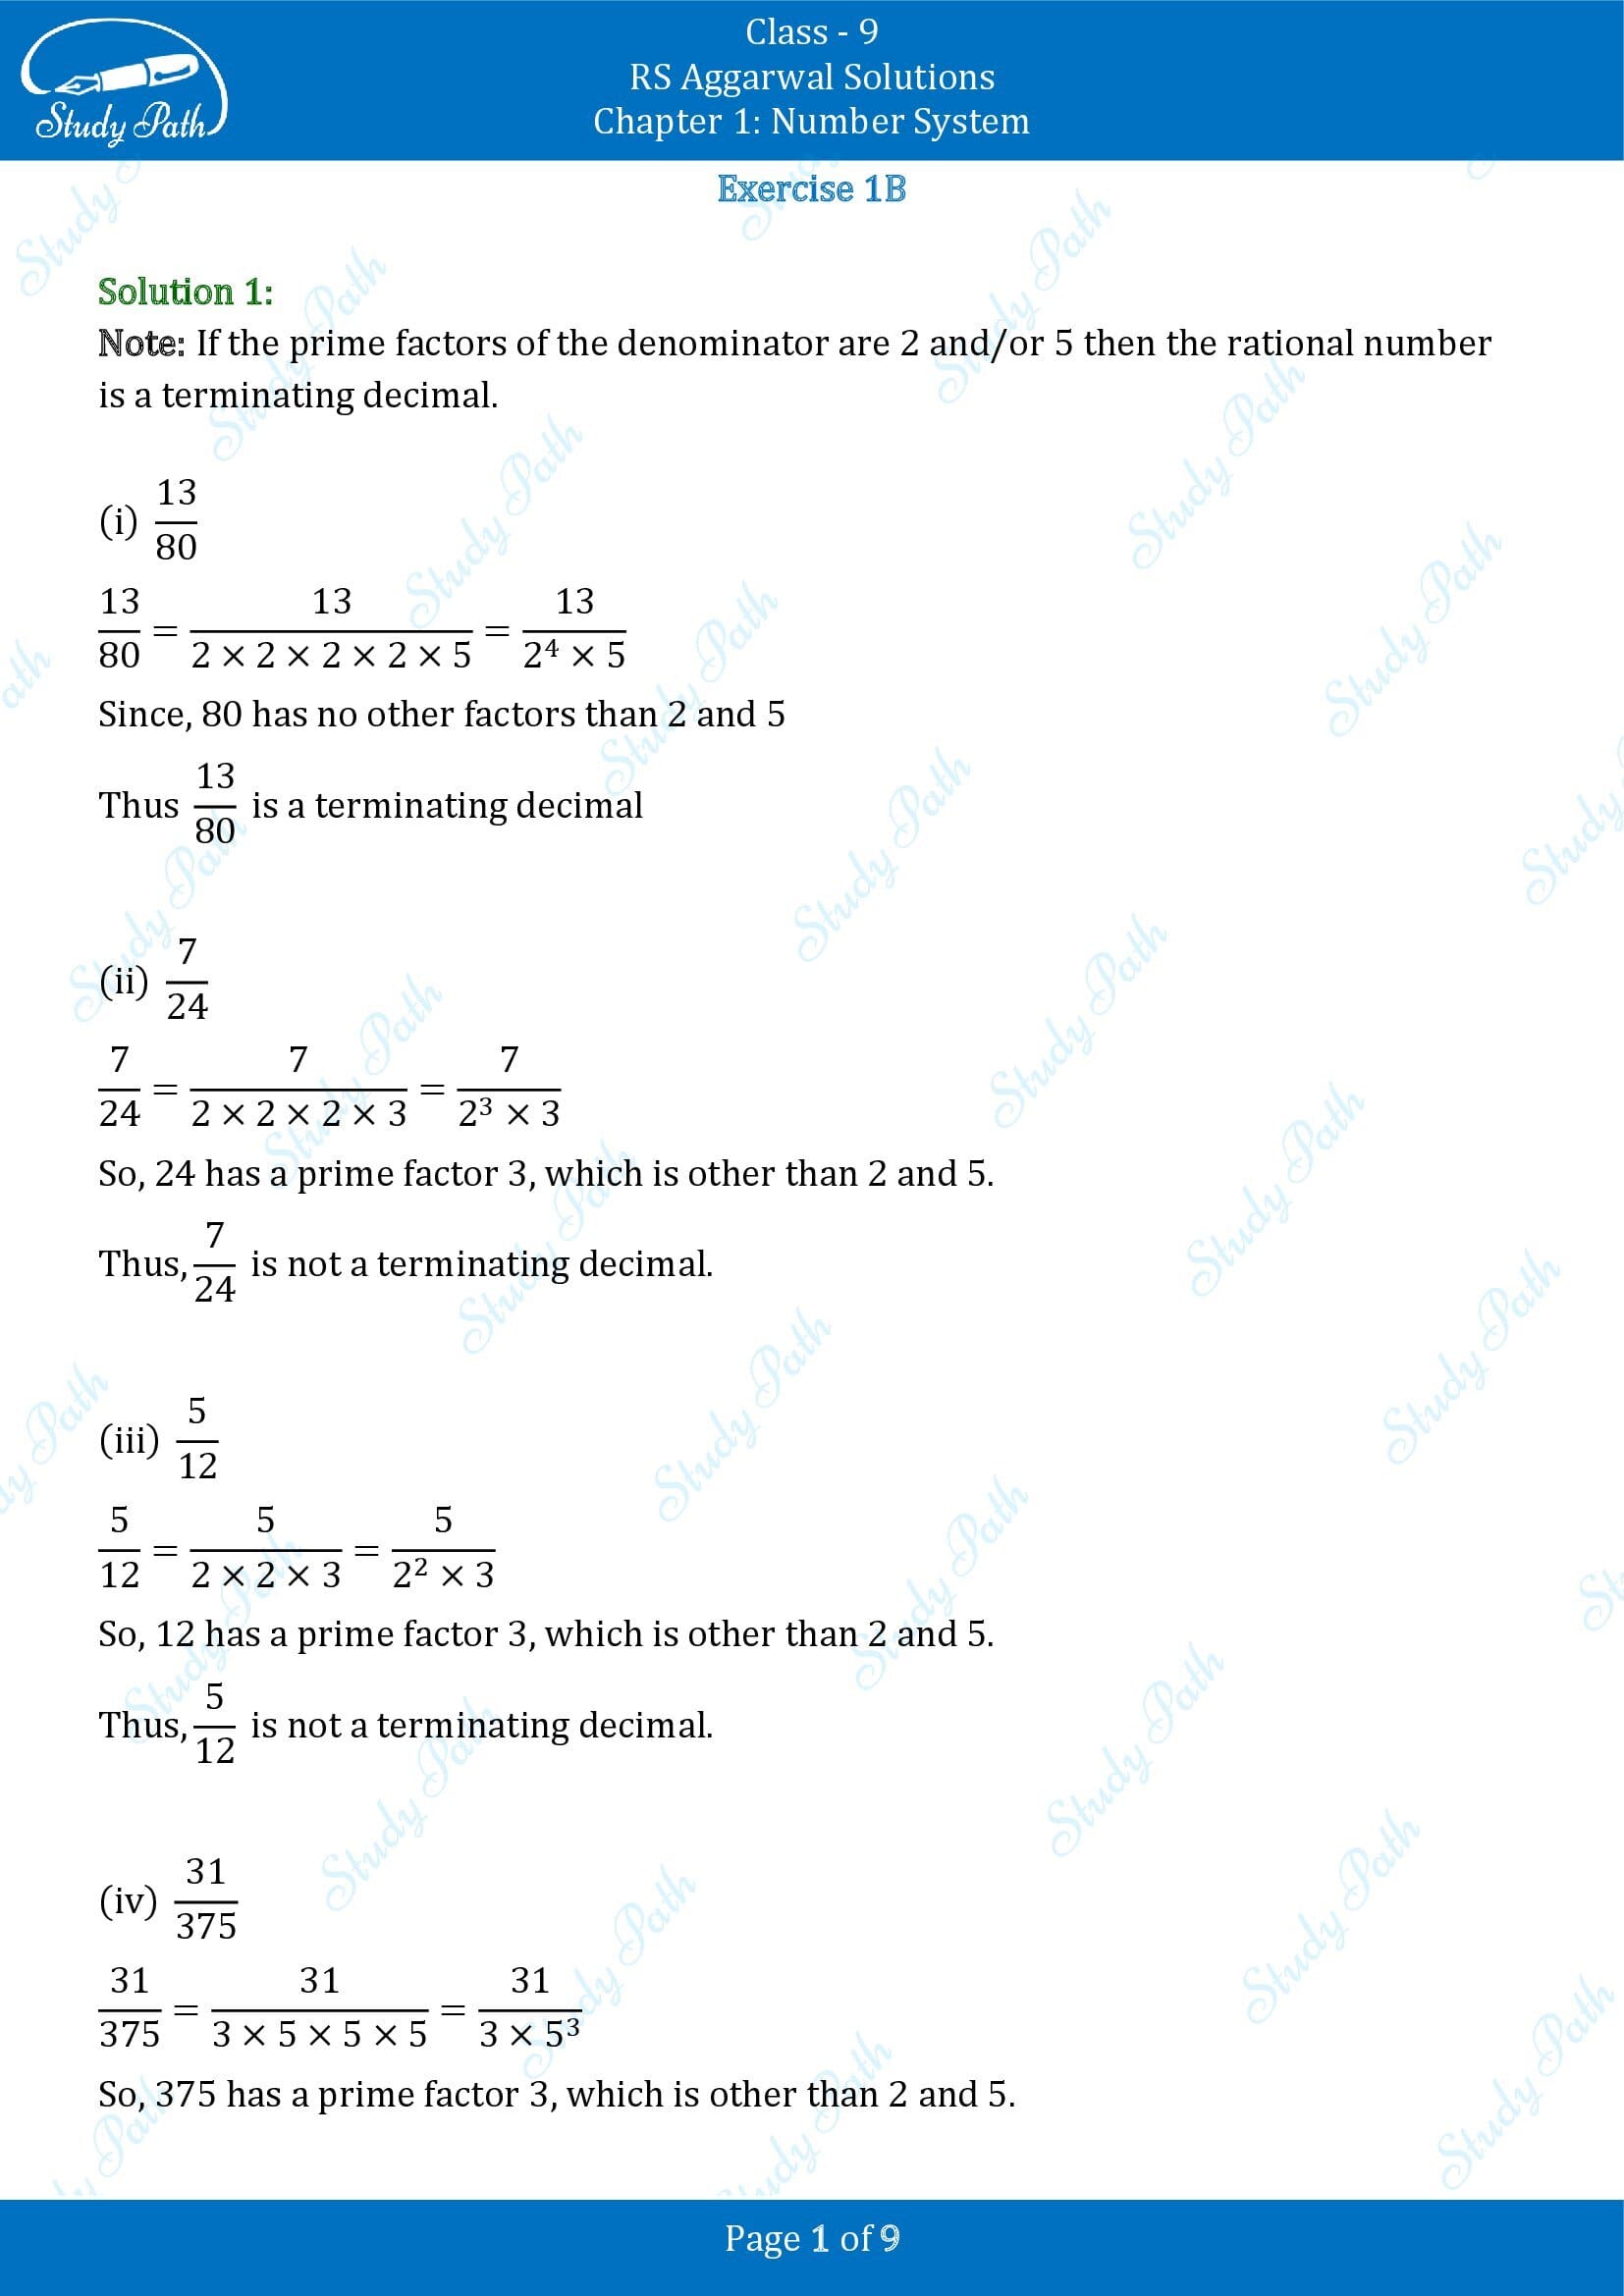 RS Aggarwal Solutions Class 9 Chapter 1 Number System Exercise 1B 00001